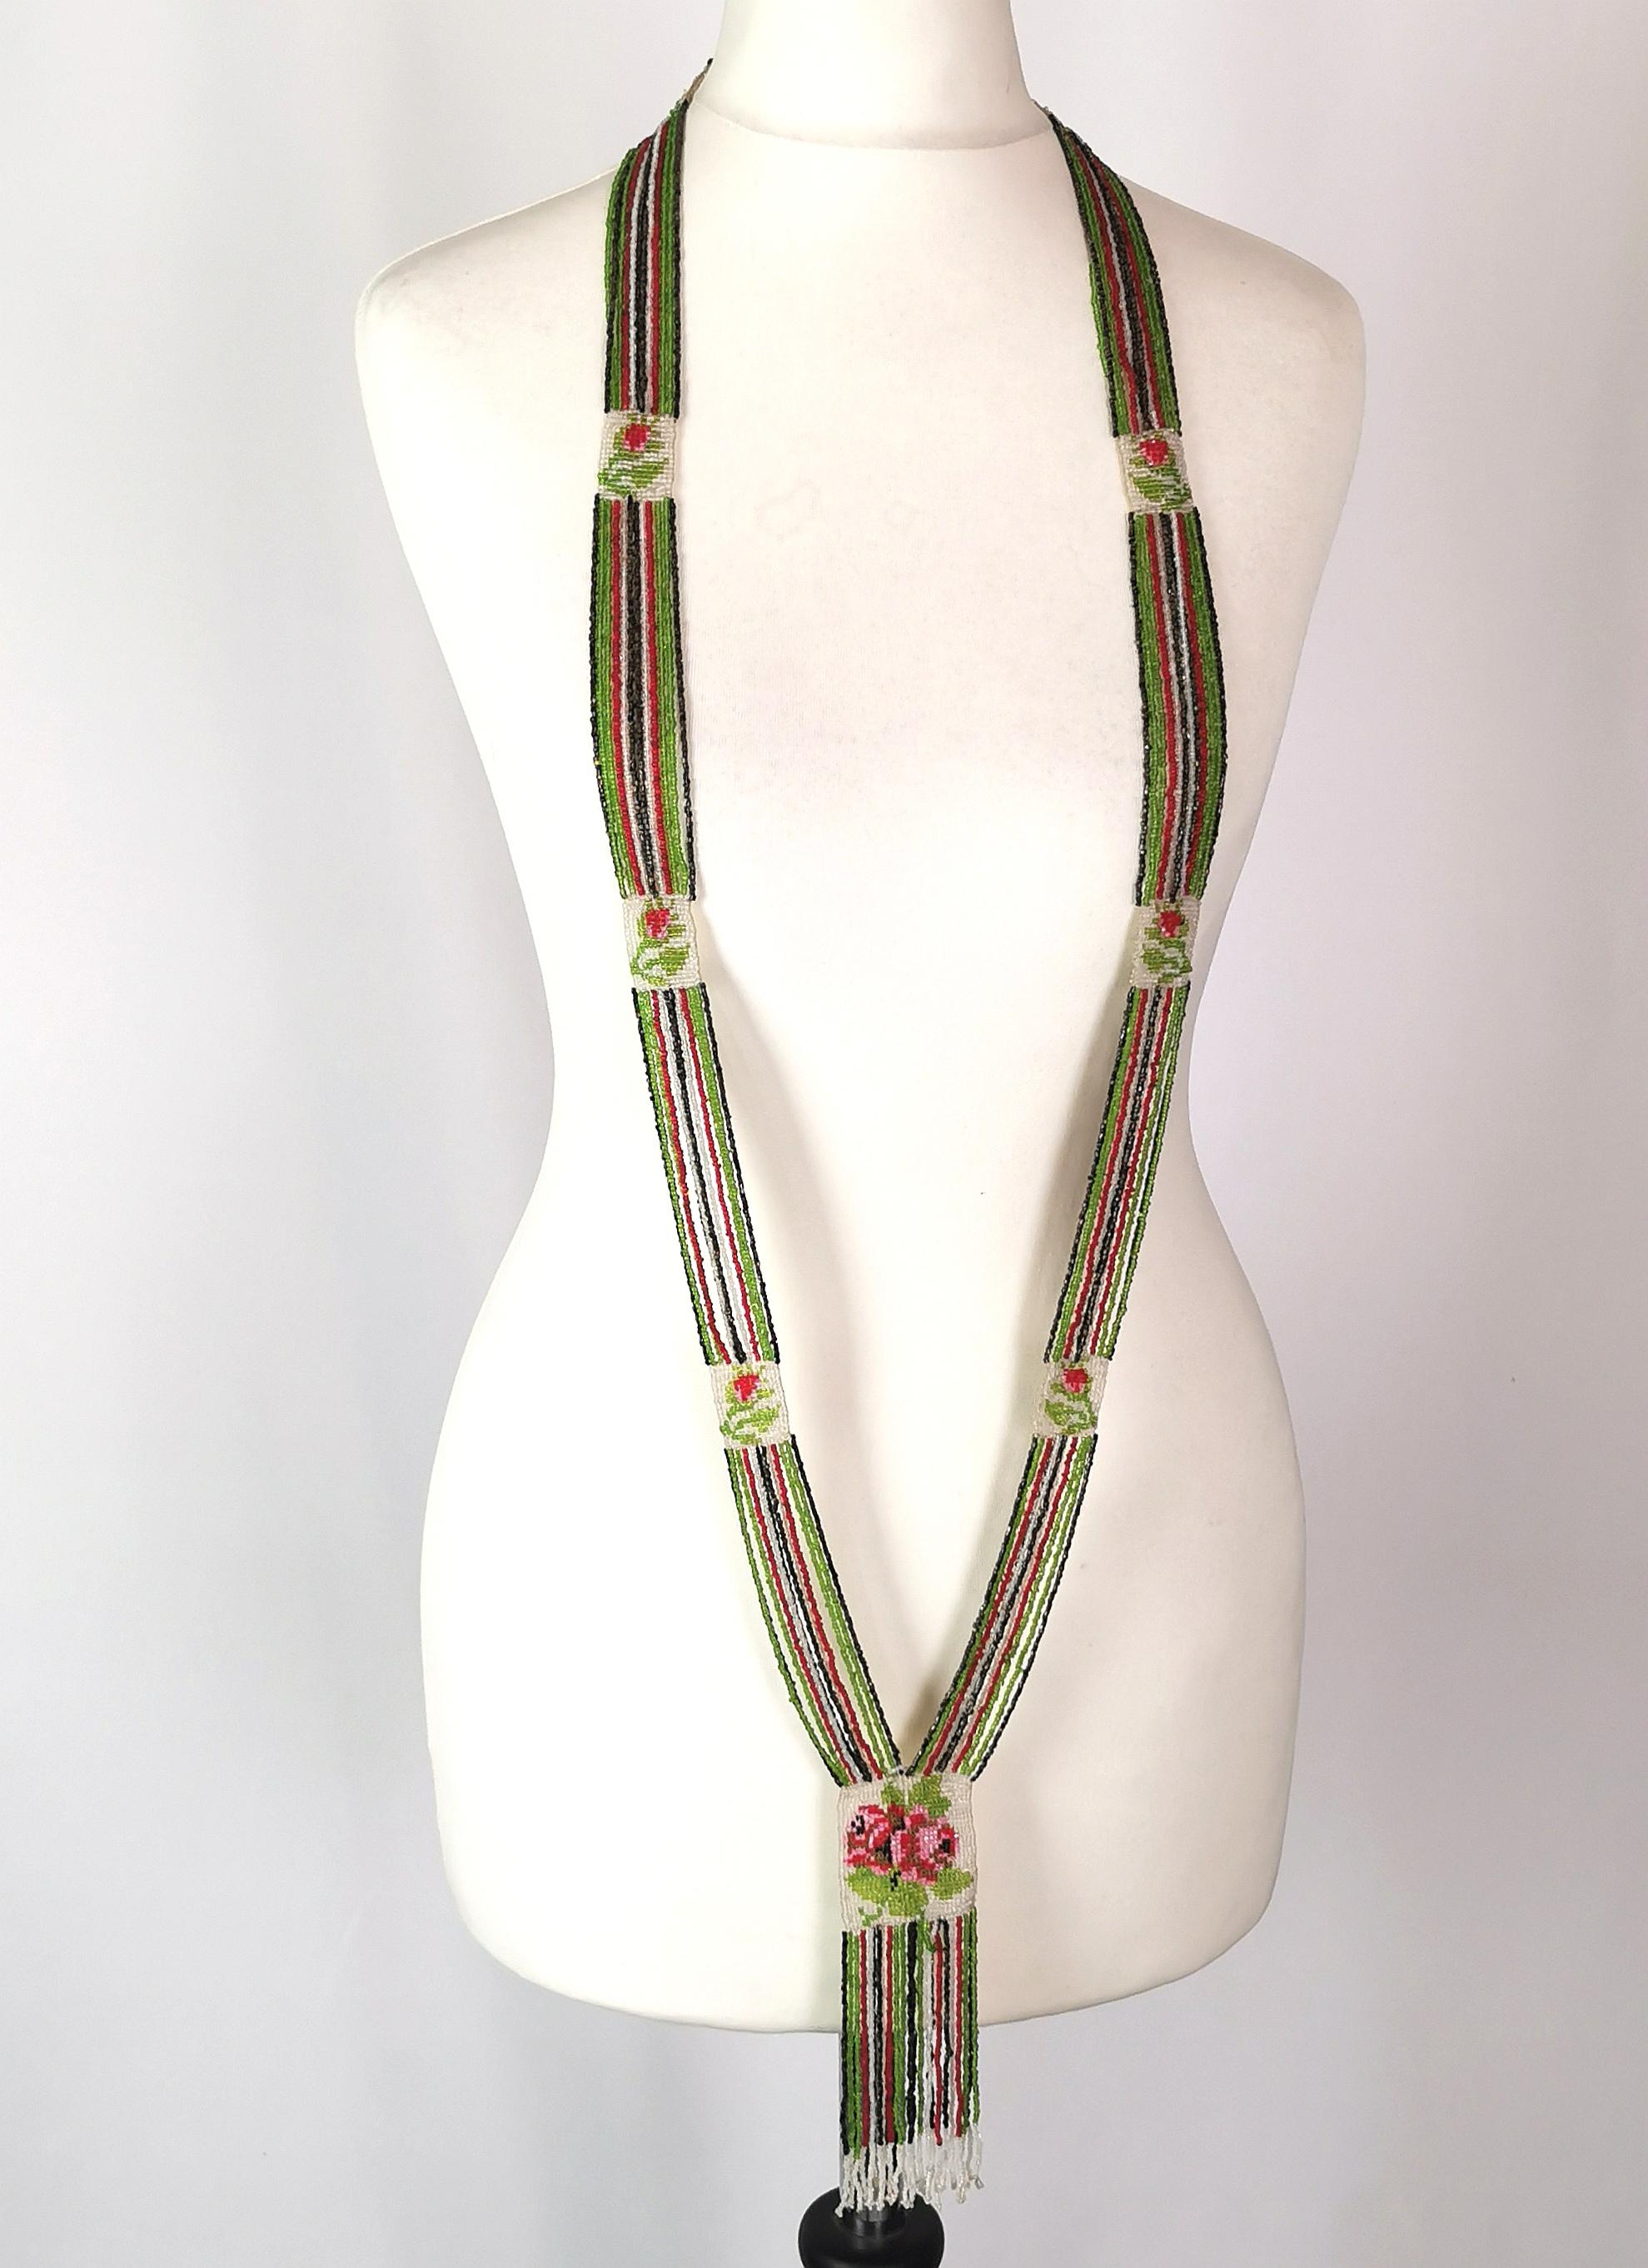 A rare Vintage Art Deco glass beadwork sautoir necklace.

This is a long, Flapper length necklace, constructed from rows and rows of tiny, hand strung glass beads in green, pink, black and white.

The necklace has small beadwork panels at intervals